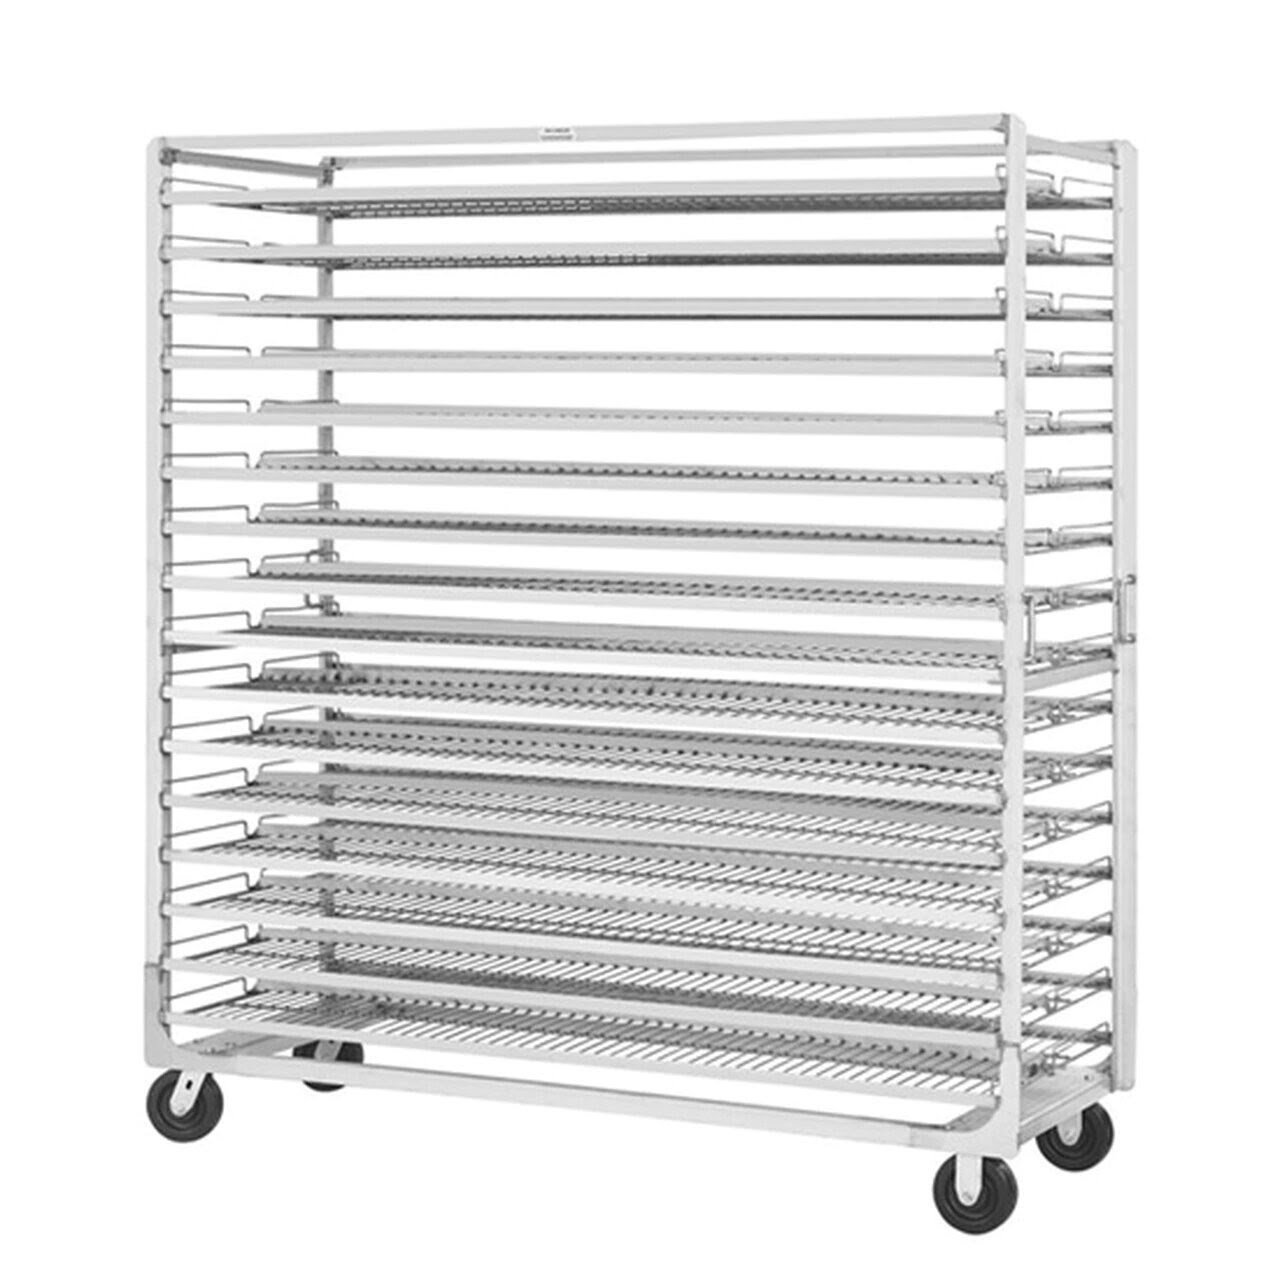 What Is a Cooling Rack and Why Do You Need It?